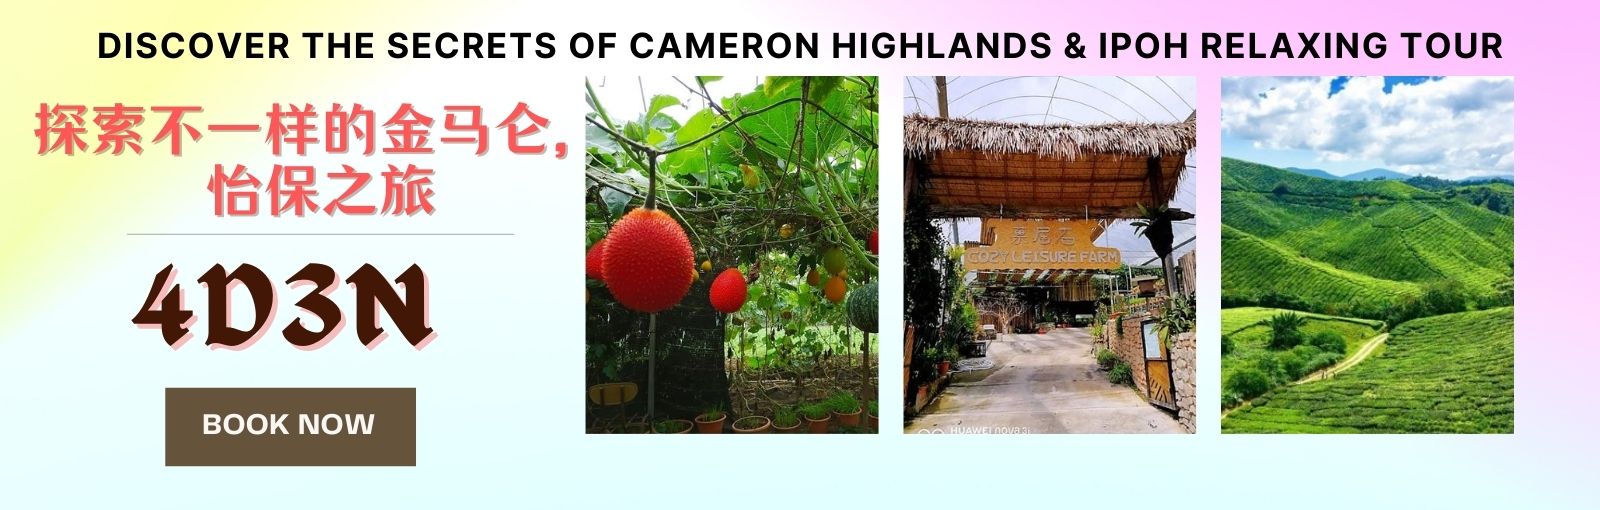 https://www.96travel.com.sg/tour?id=130&n=4d-discover-the-secrets-of-cameron-highlands--ipoh-tour